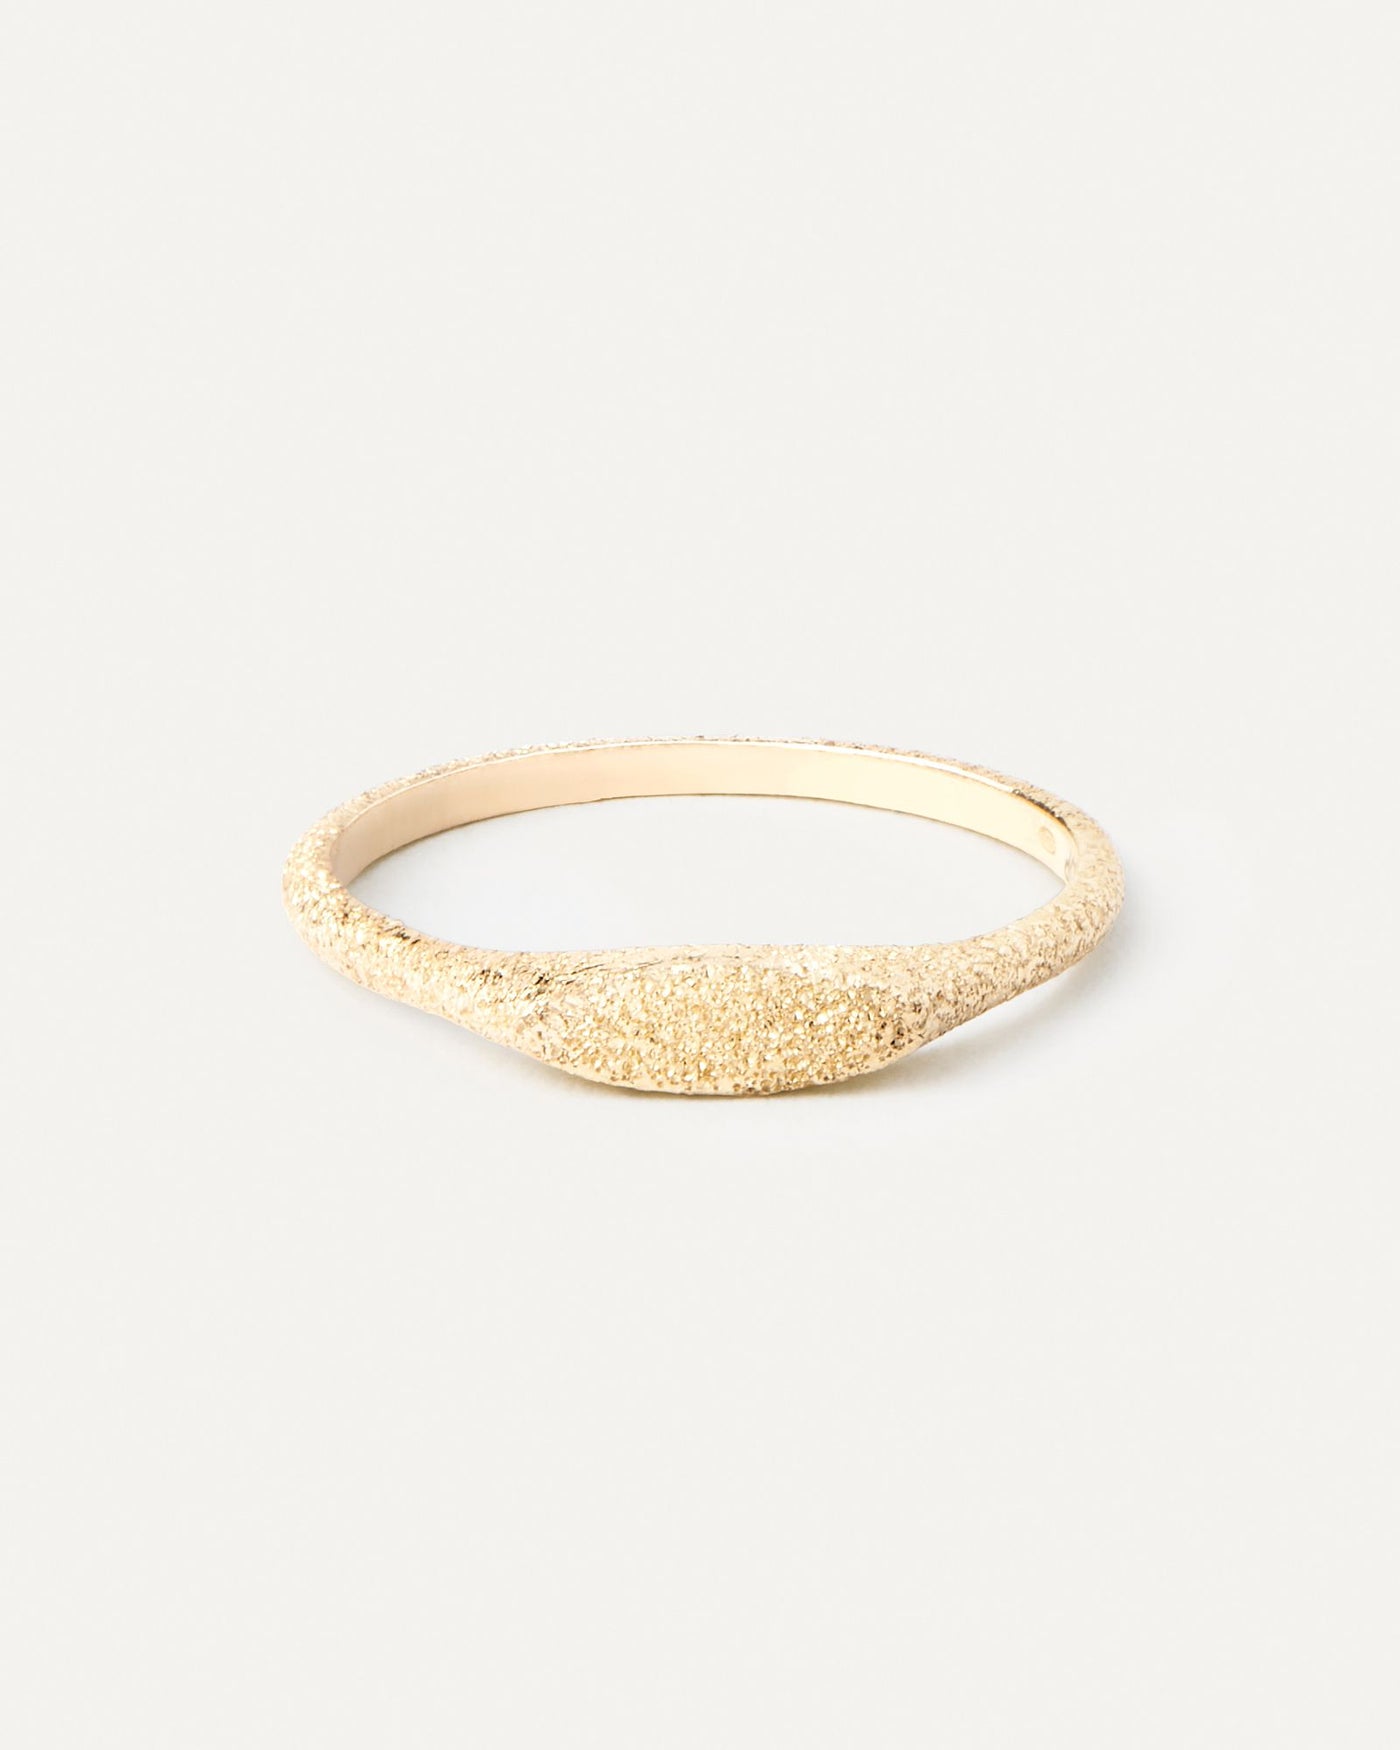 2024 Selection | Sandblasted Gold Cleo Stamp Ring. Slim signet ring in solid 18K yellow gold with a sandblast finish. Get the latest arrival from PDPAOLA. Place your order safely and get this Best Seller. Free Shipping.